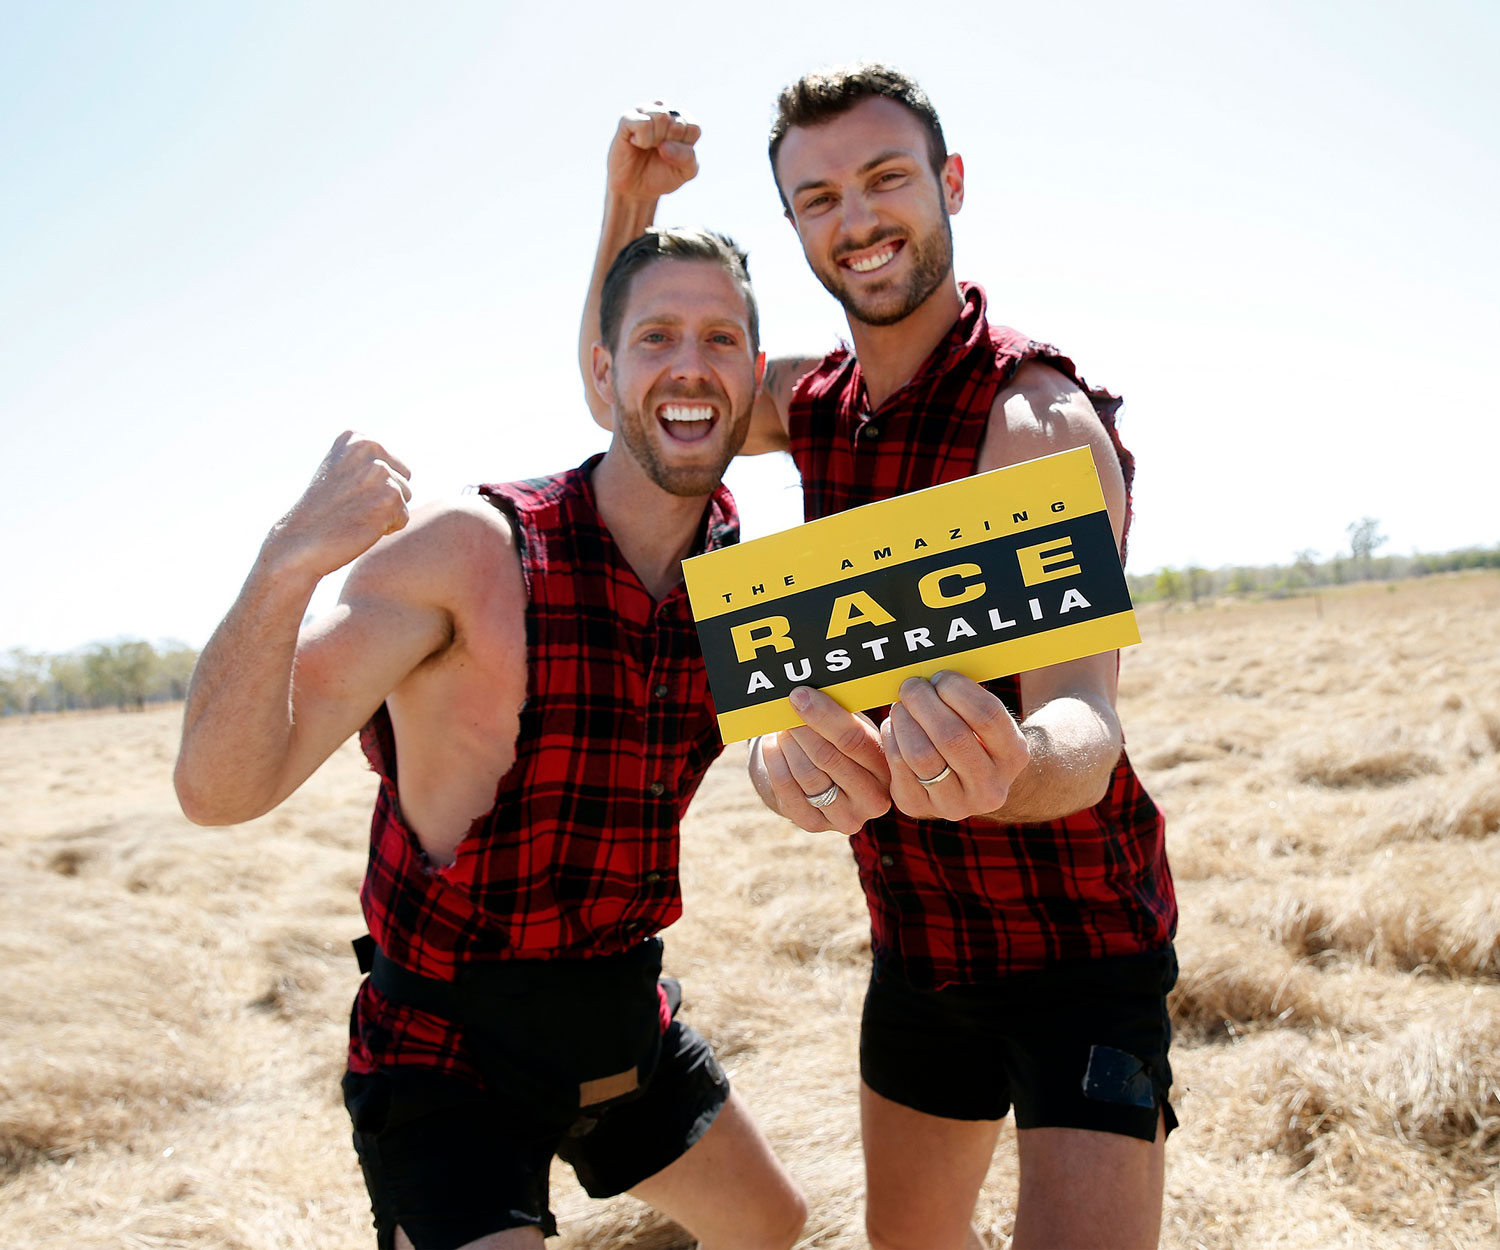 Newlyweds Tim and Rod Crowned the Winners of The Amazing Race Australia